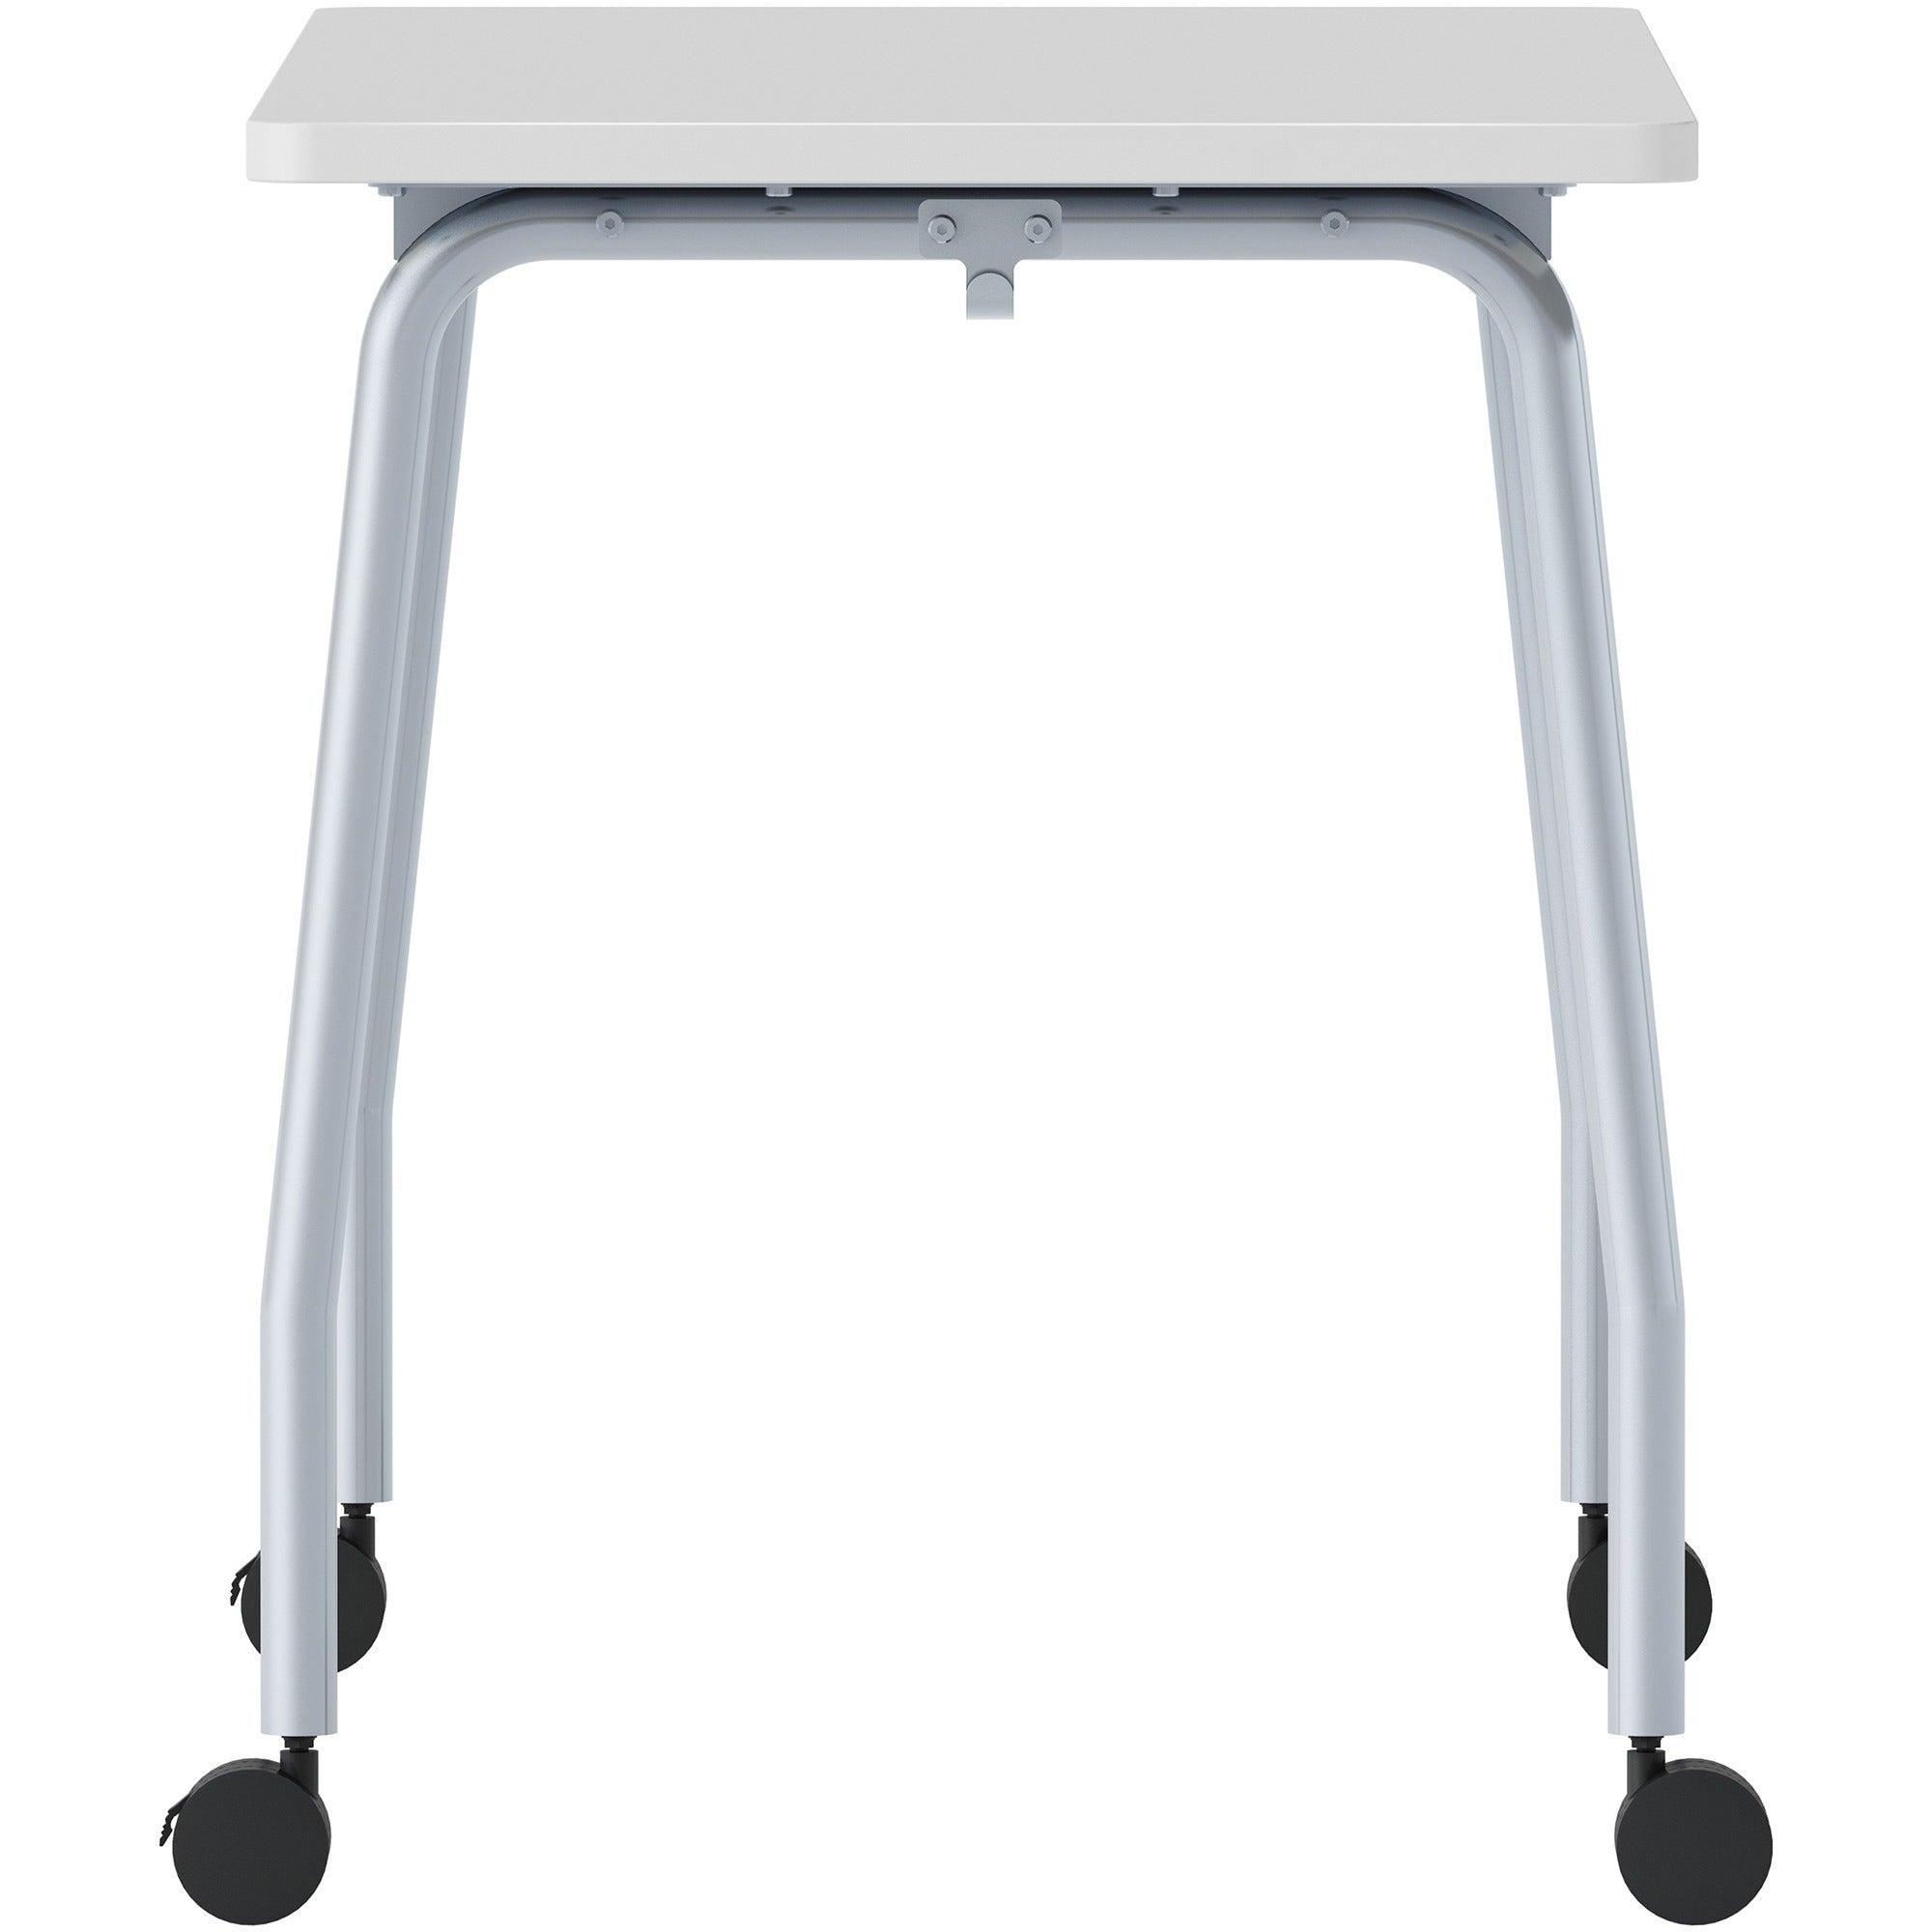 lorell-training-table-for-table-toplaminated-top-300-lb-capacity-2950-table-top-length-x-2363-table-top-width-x-1-table-top-thickness-4725-height-assembly-required-gray-particleboard-top-material-1-each_llr60847 - 5